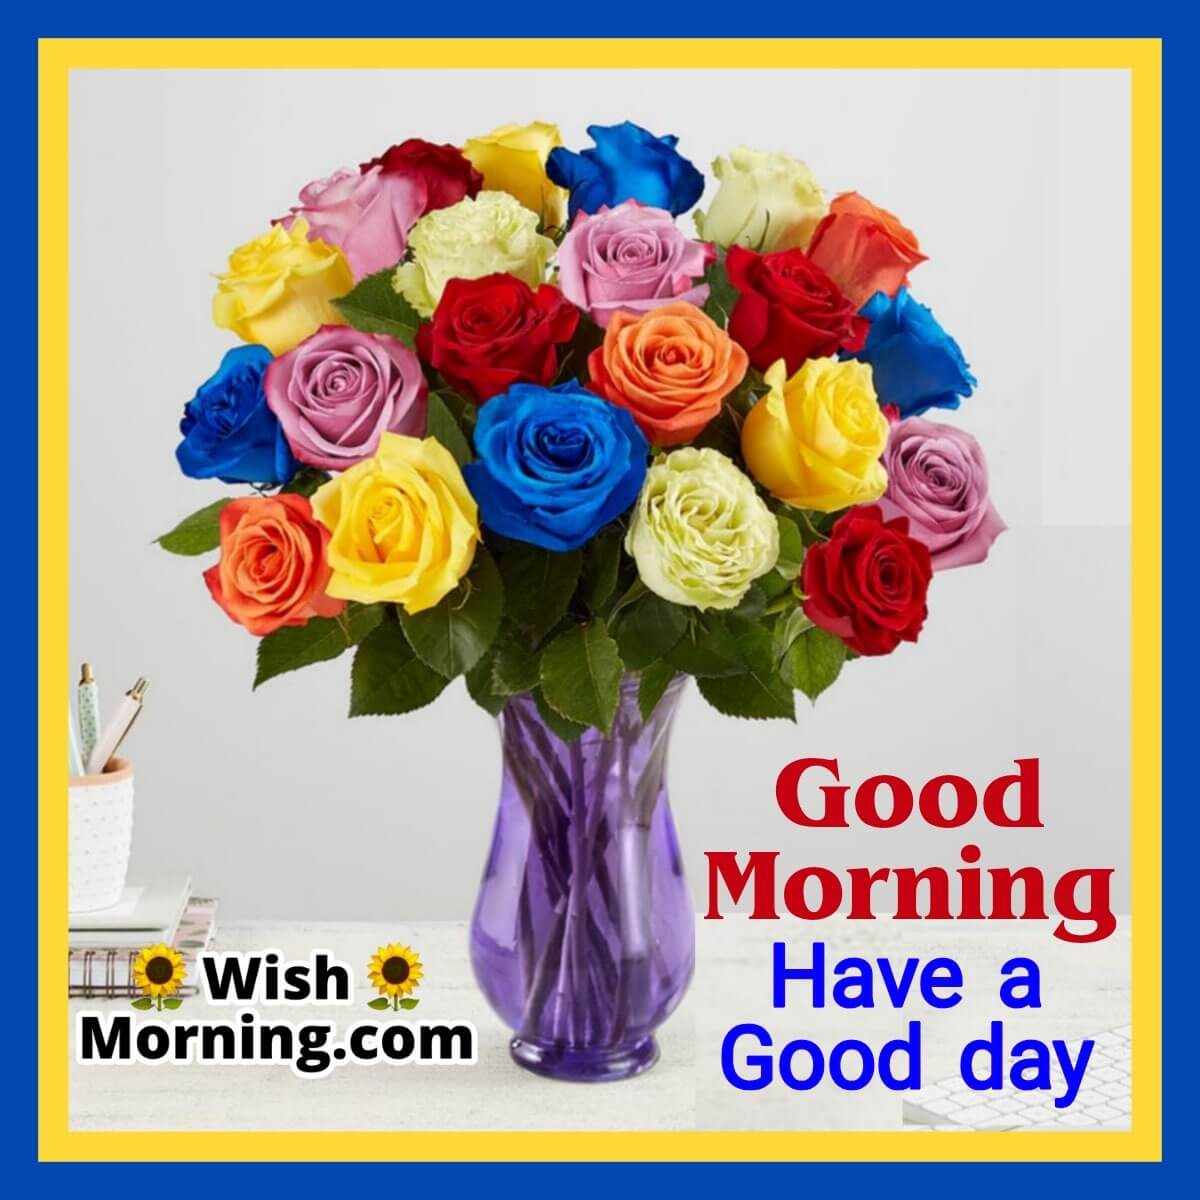 Good Morning Colourful Rose Bouquet